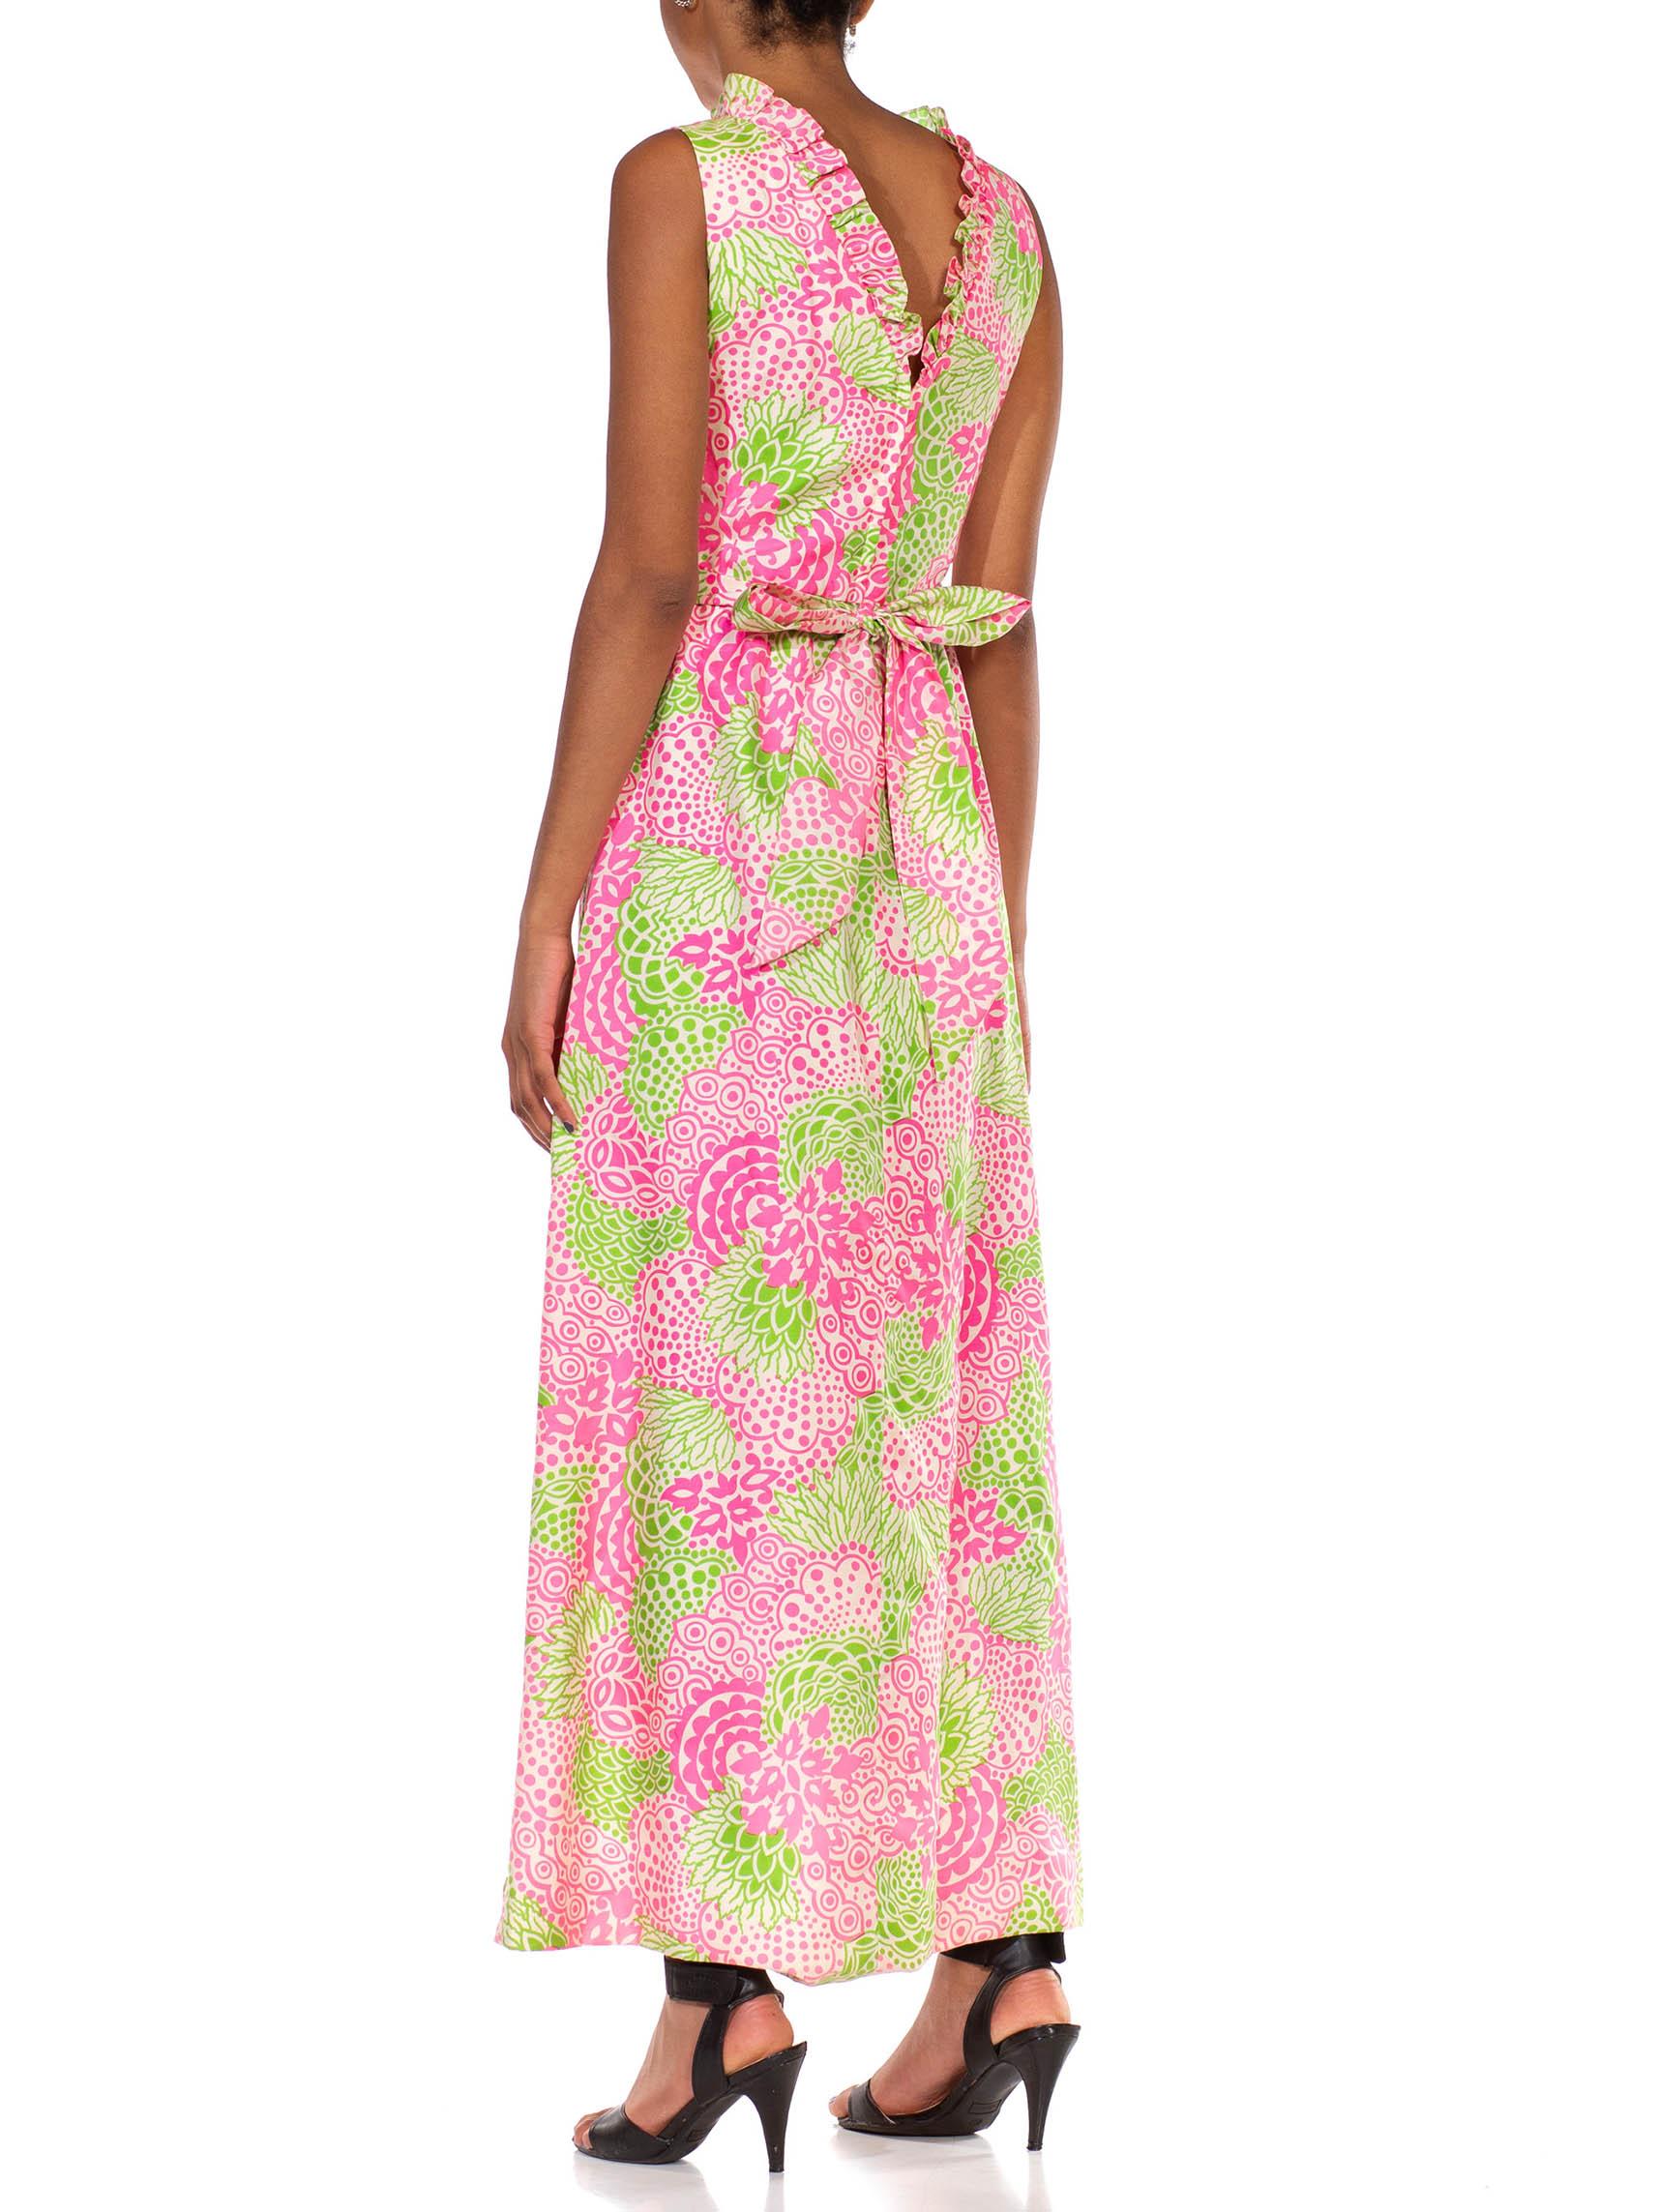 1960S LILLY PULITZER Style Pink & Green Cotton Sleeveless Maxi Dress  For Sale 2